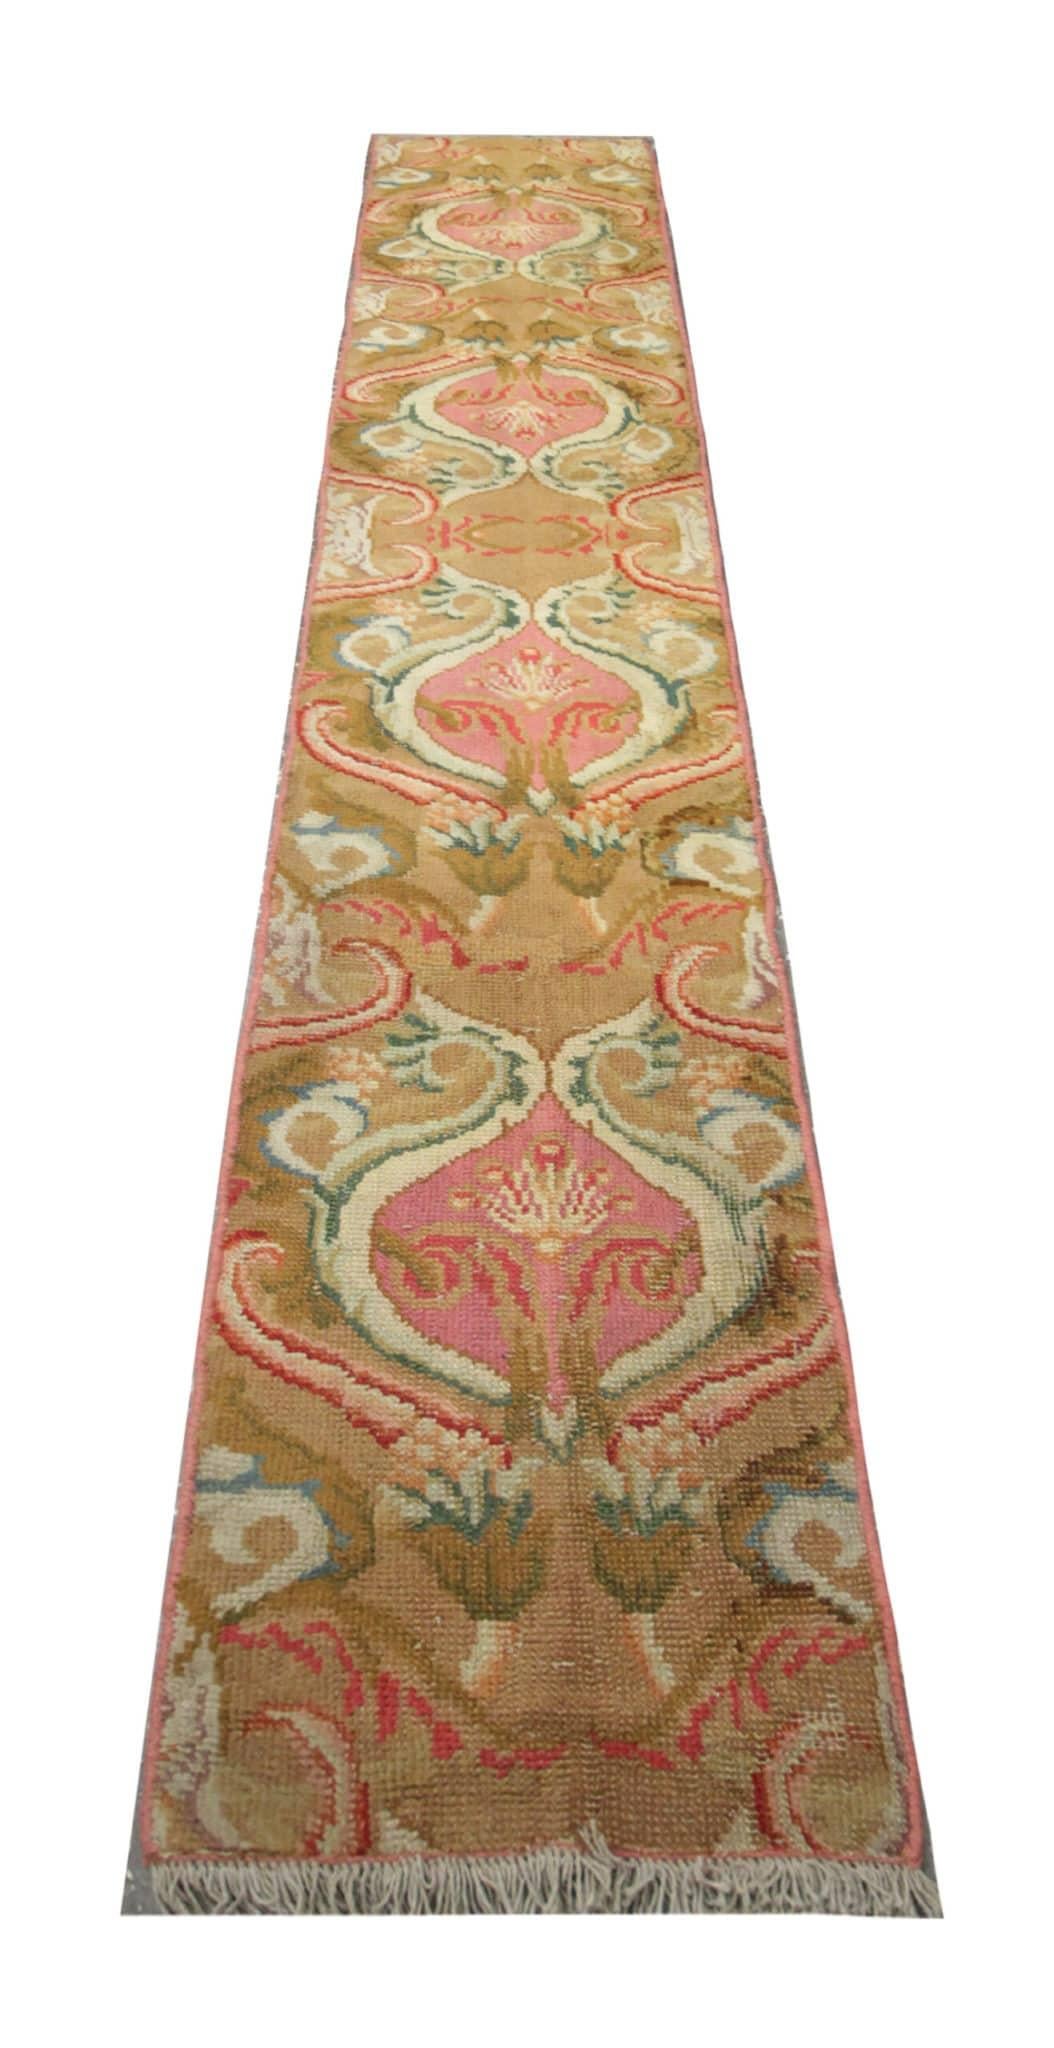 Rare Antique Rug English Axminister Handmade Runner Rug, Floral Carpet Runner In Excellent Condition For Sale In Hampshire, GB